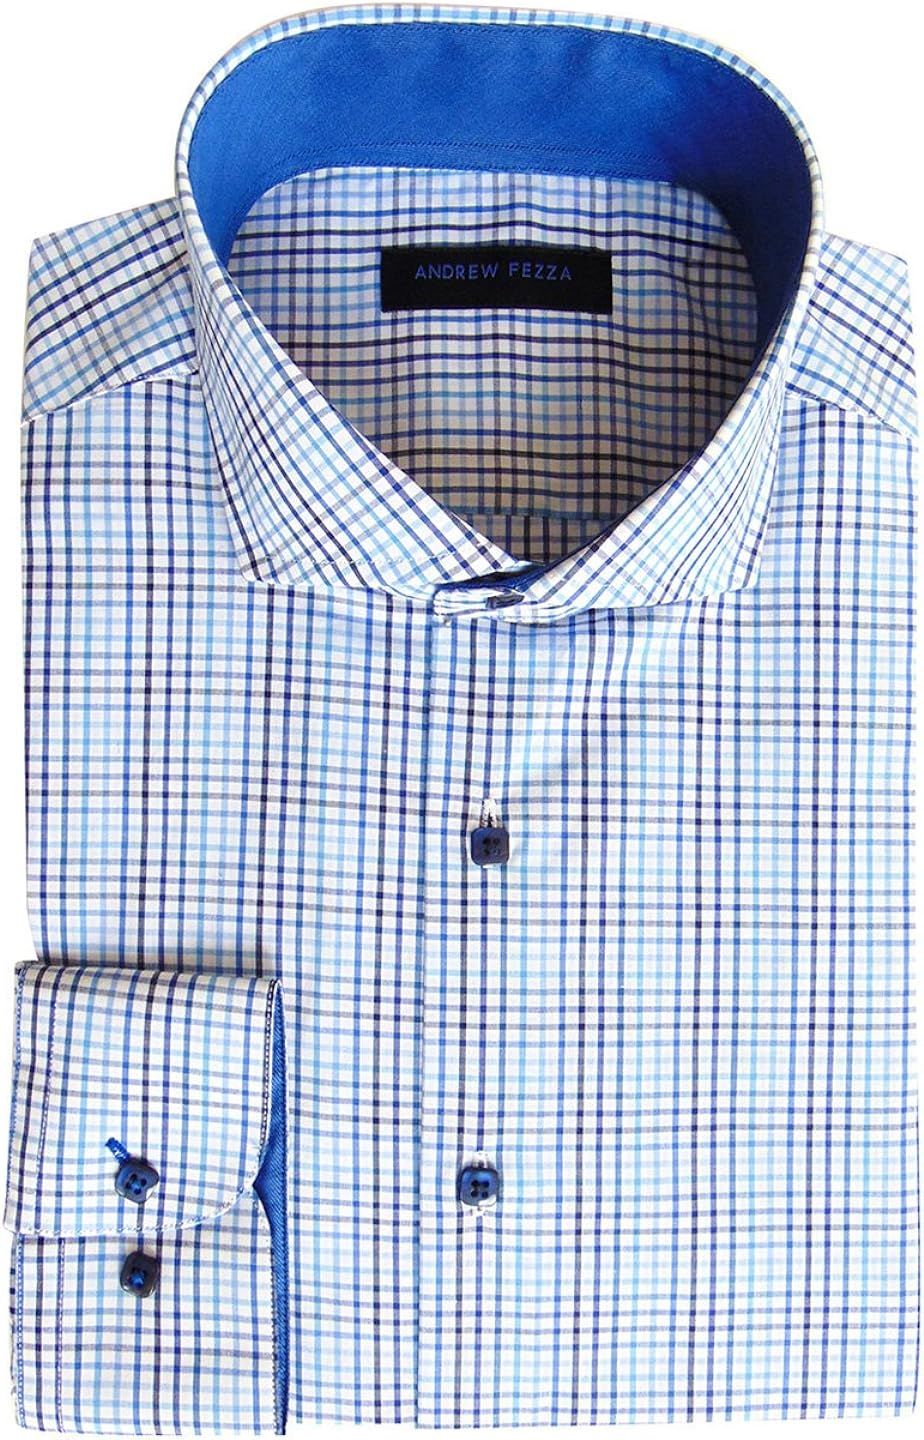 Andrew Fezza Men's Slim Fit Dress Shirt -Available in Many Paterns and Colors | Amazon (US)